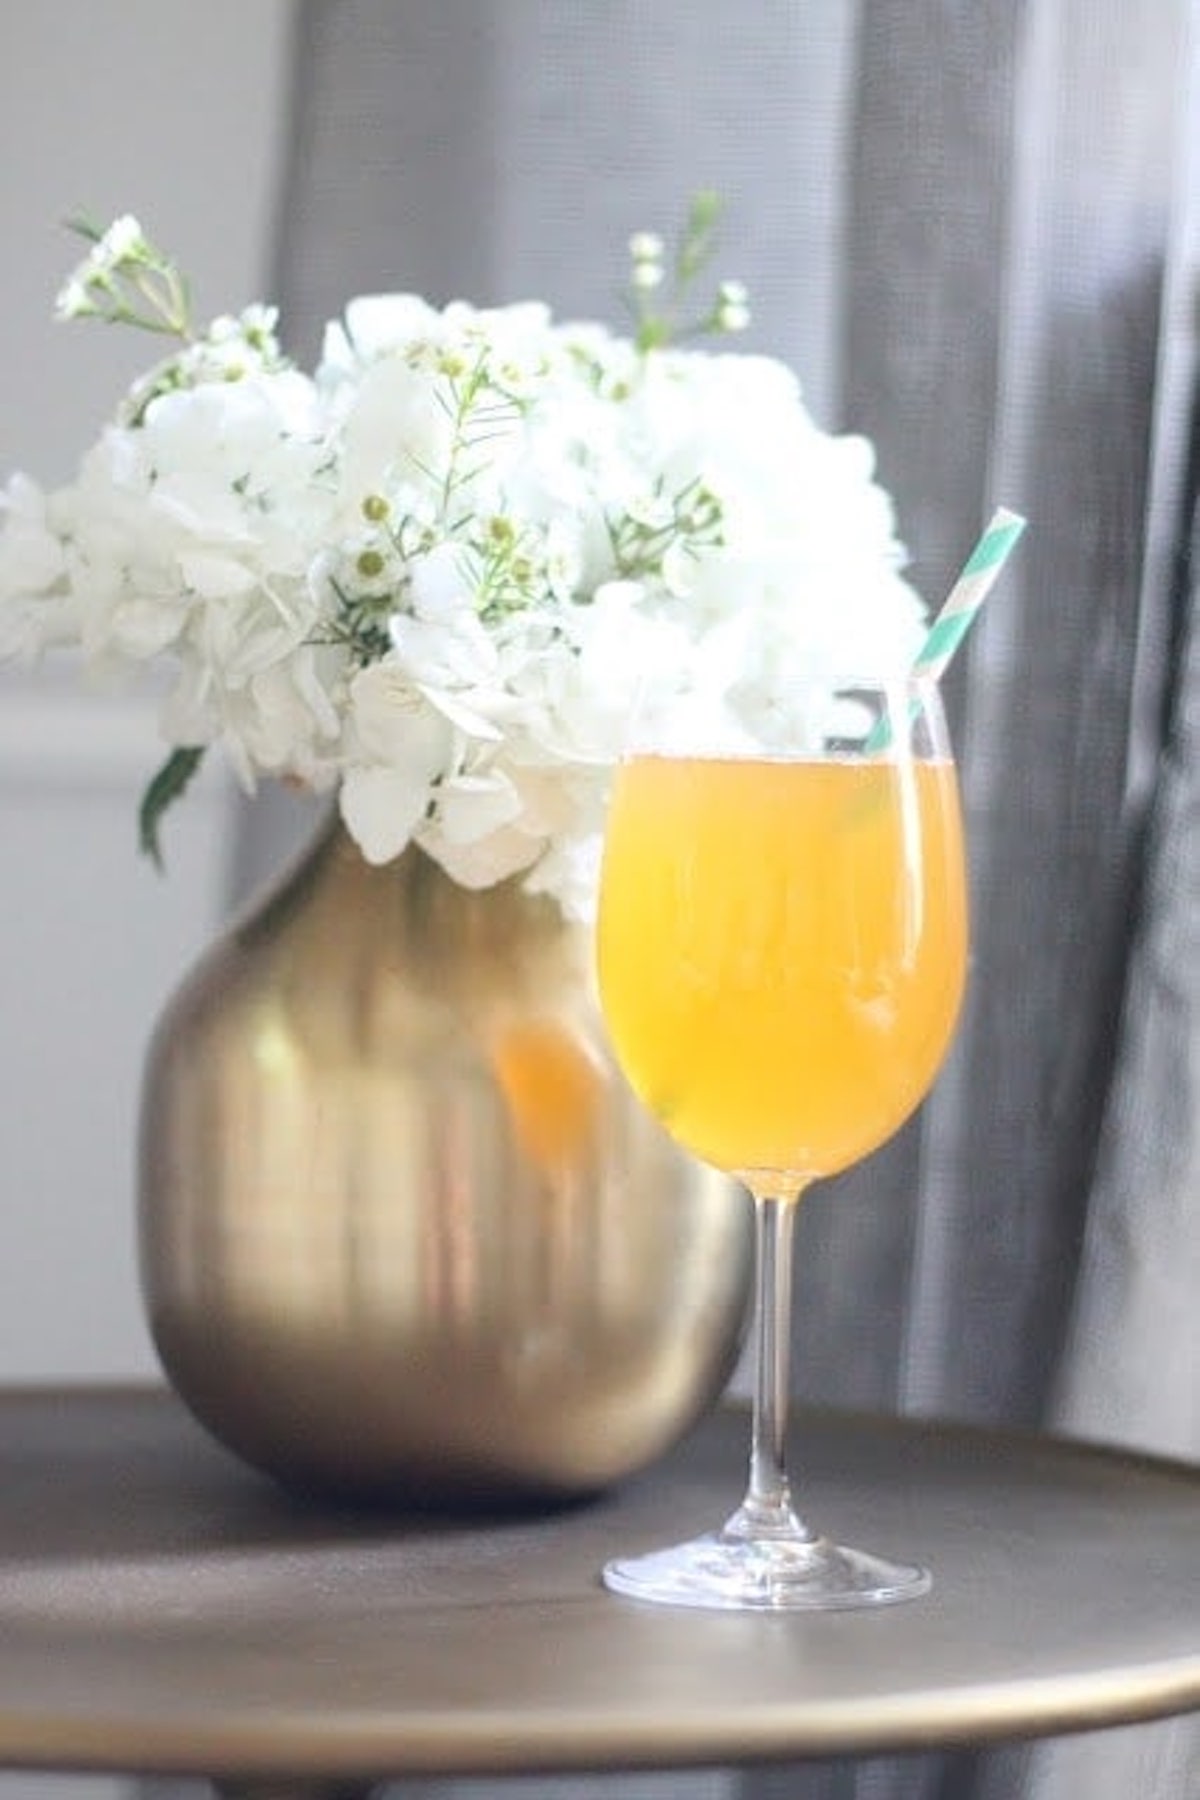 A yellow Non-Alcoholic Bellini with a green-and-white straw in a wine glass sits beside a golden vase of white flowers on a brown table, making it an elegant choice for any baby shower mocktail.